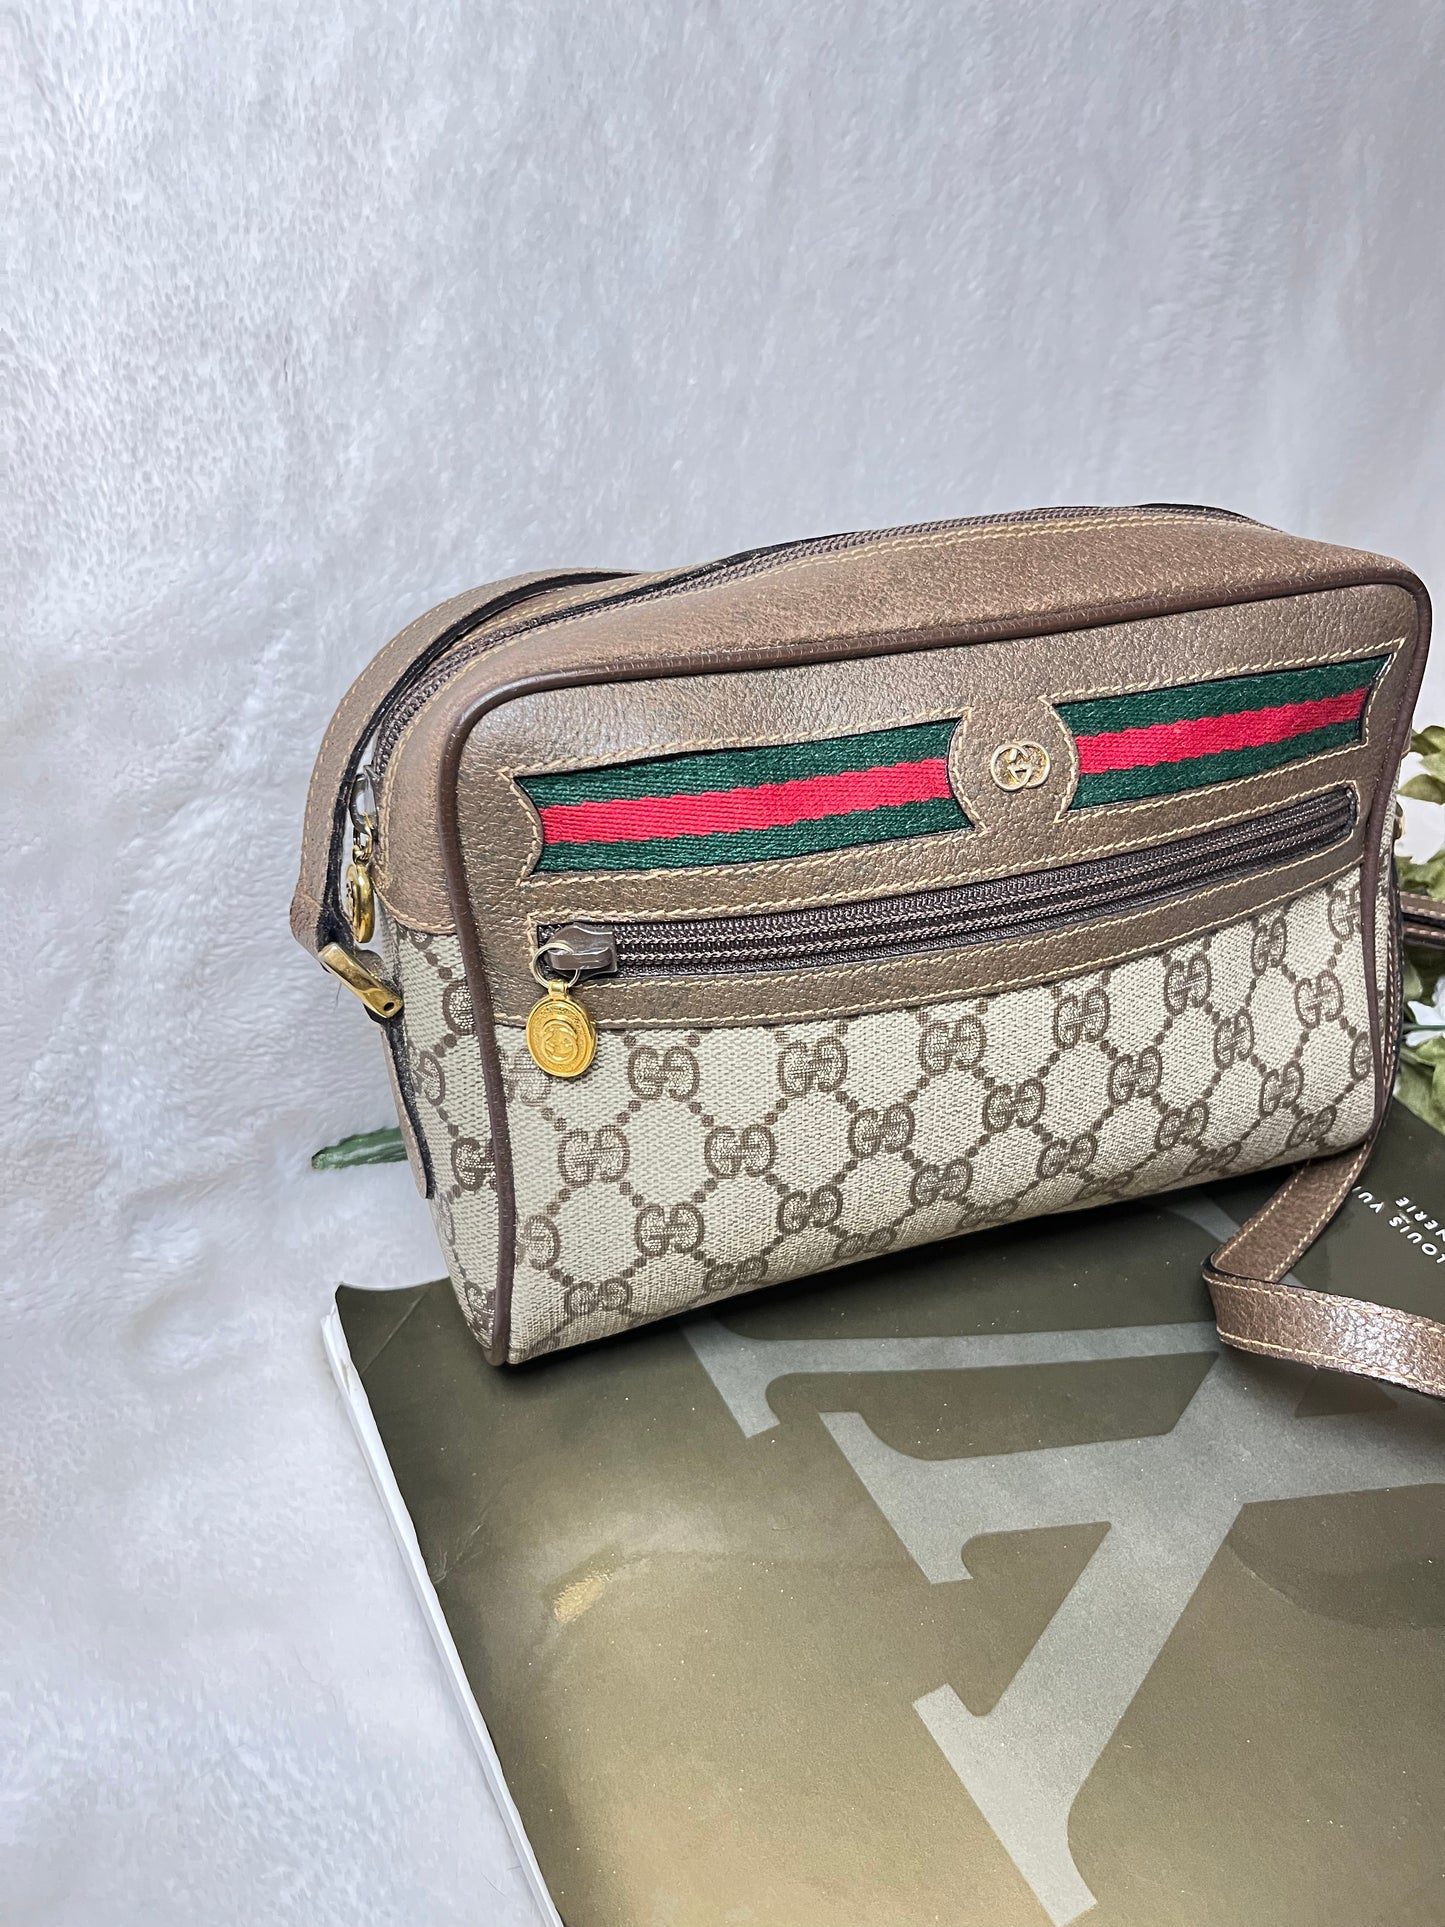 Authentic pre-owned Gucci ophidia sherry line crossbody shoulder bag